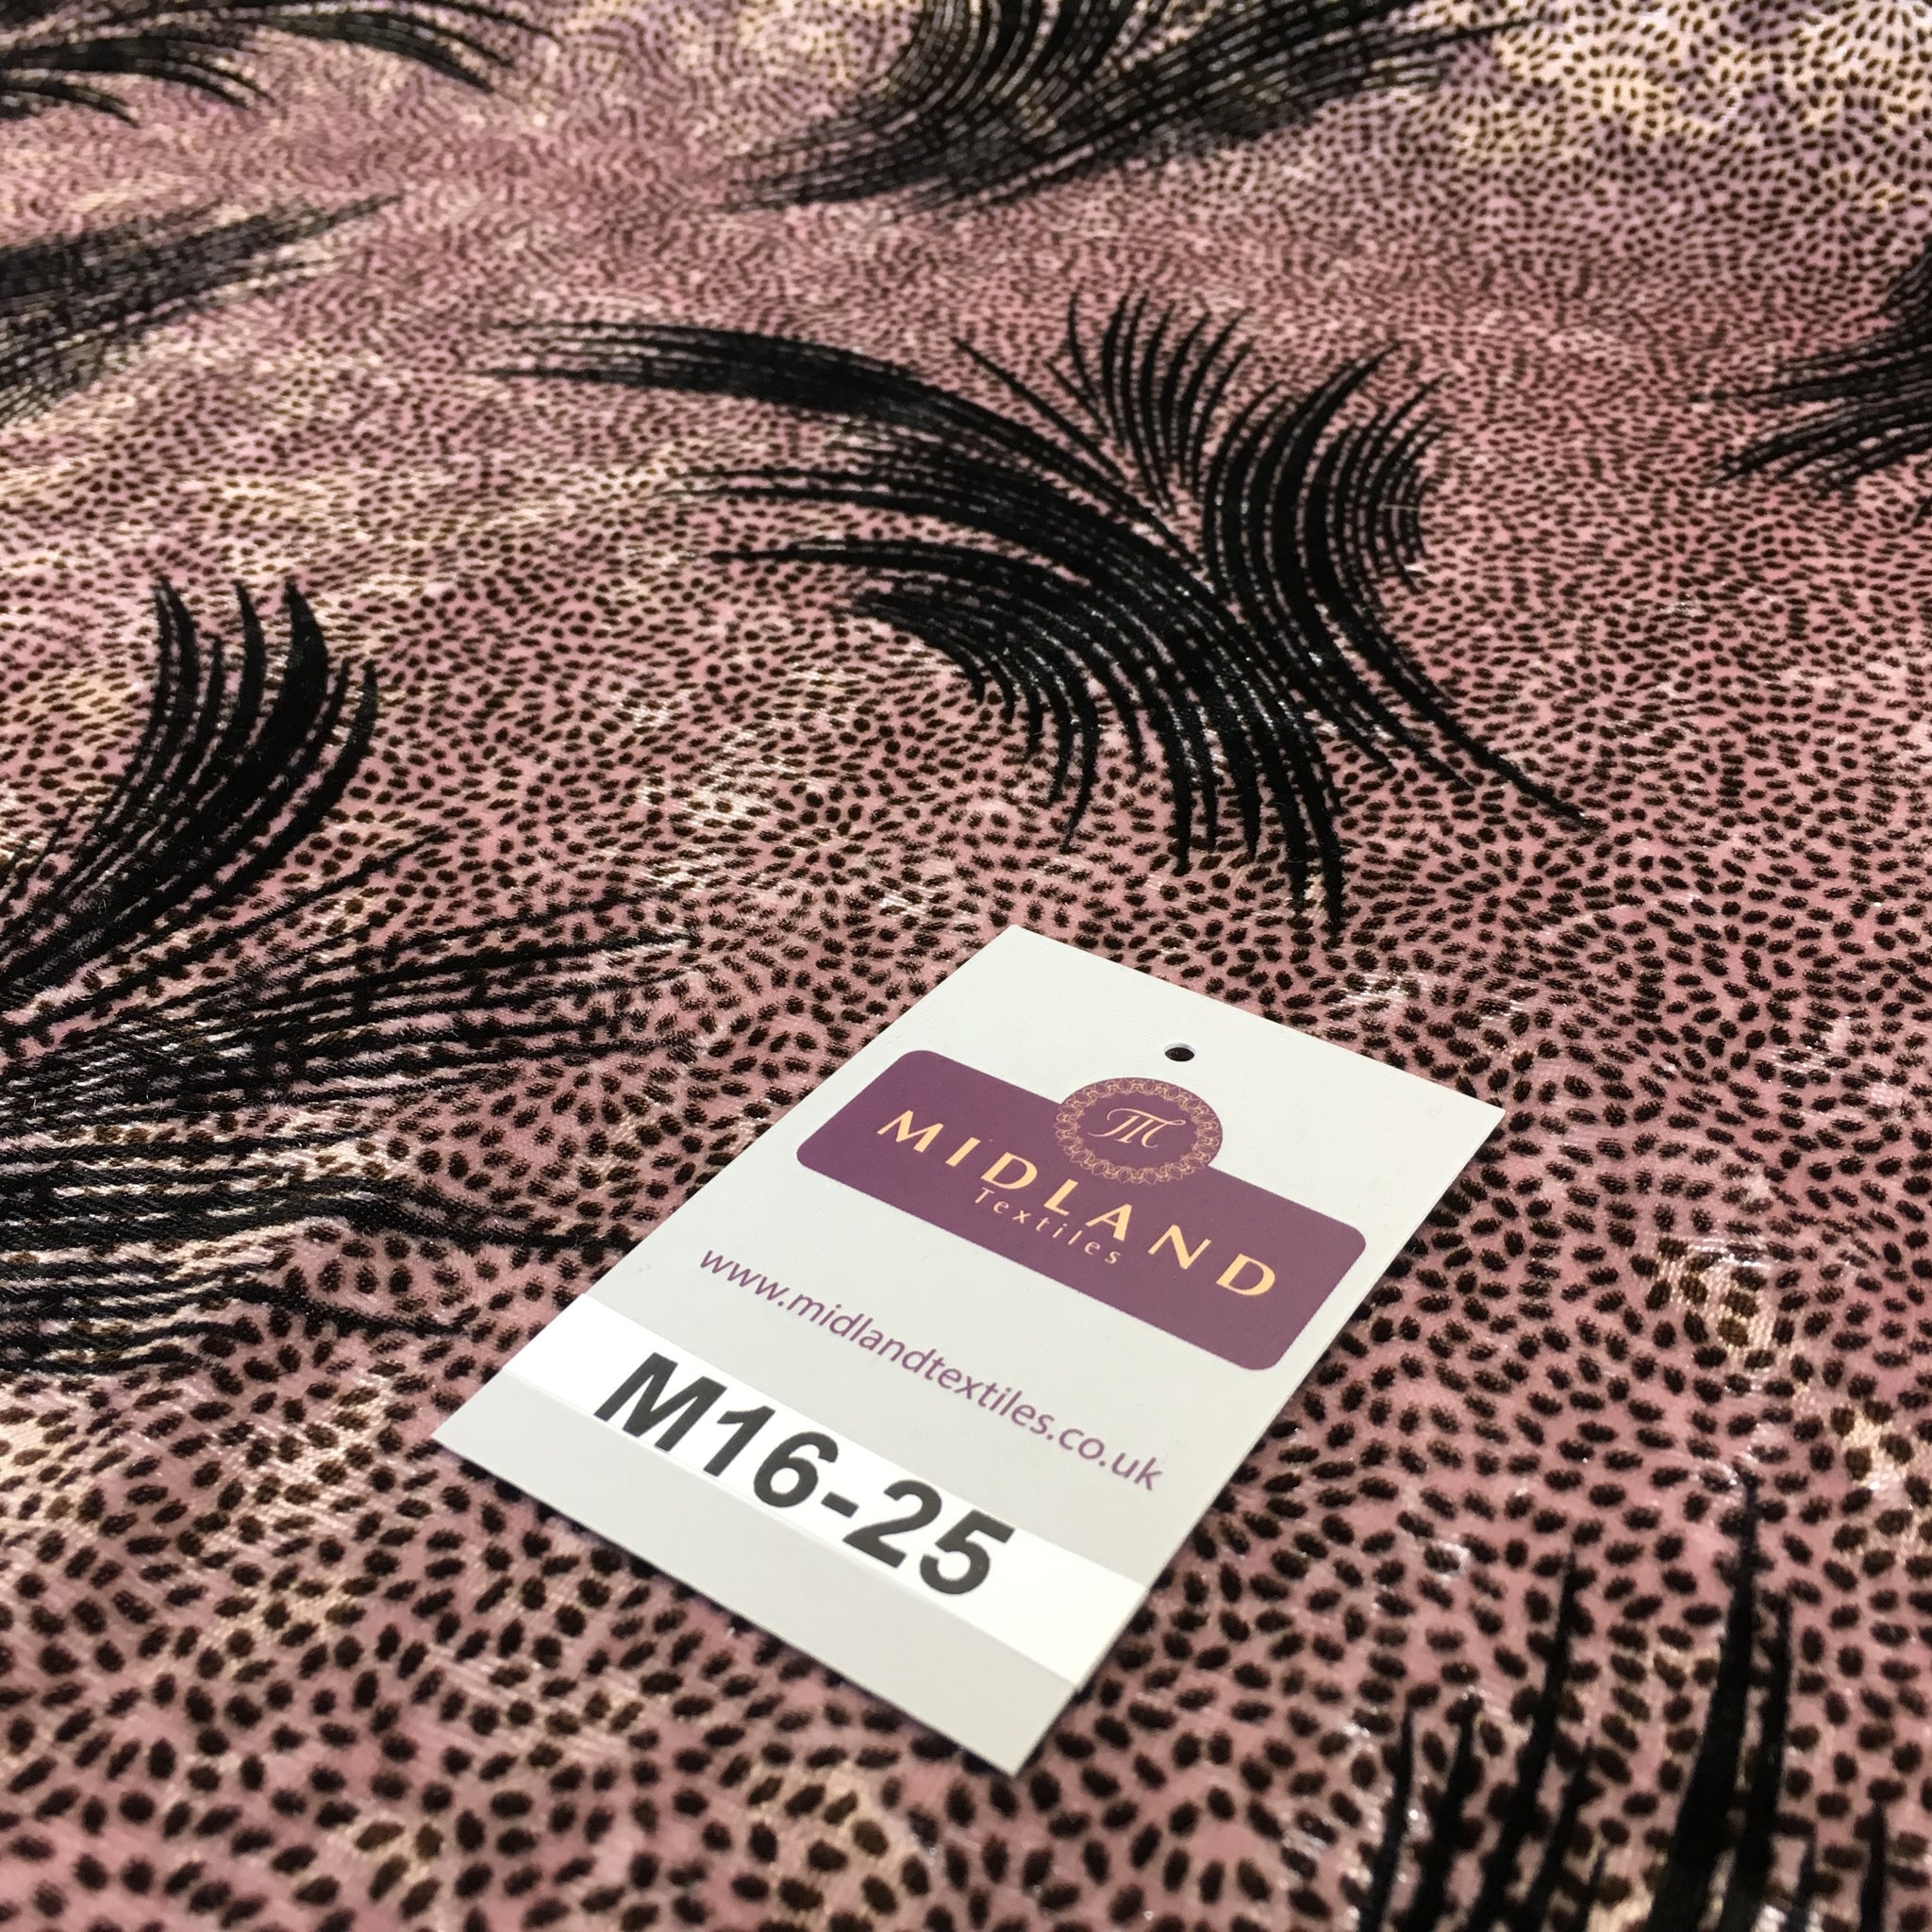 Rose Pink feathery Plant Velvet one way stretch dress fabric 58" wide M16-25 - Midland Textiles & Fabric